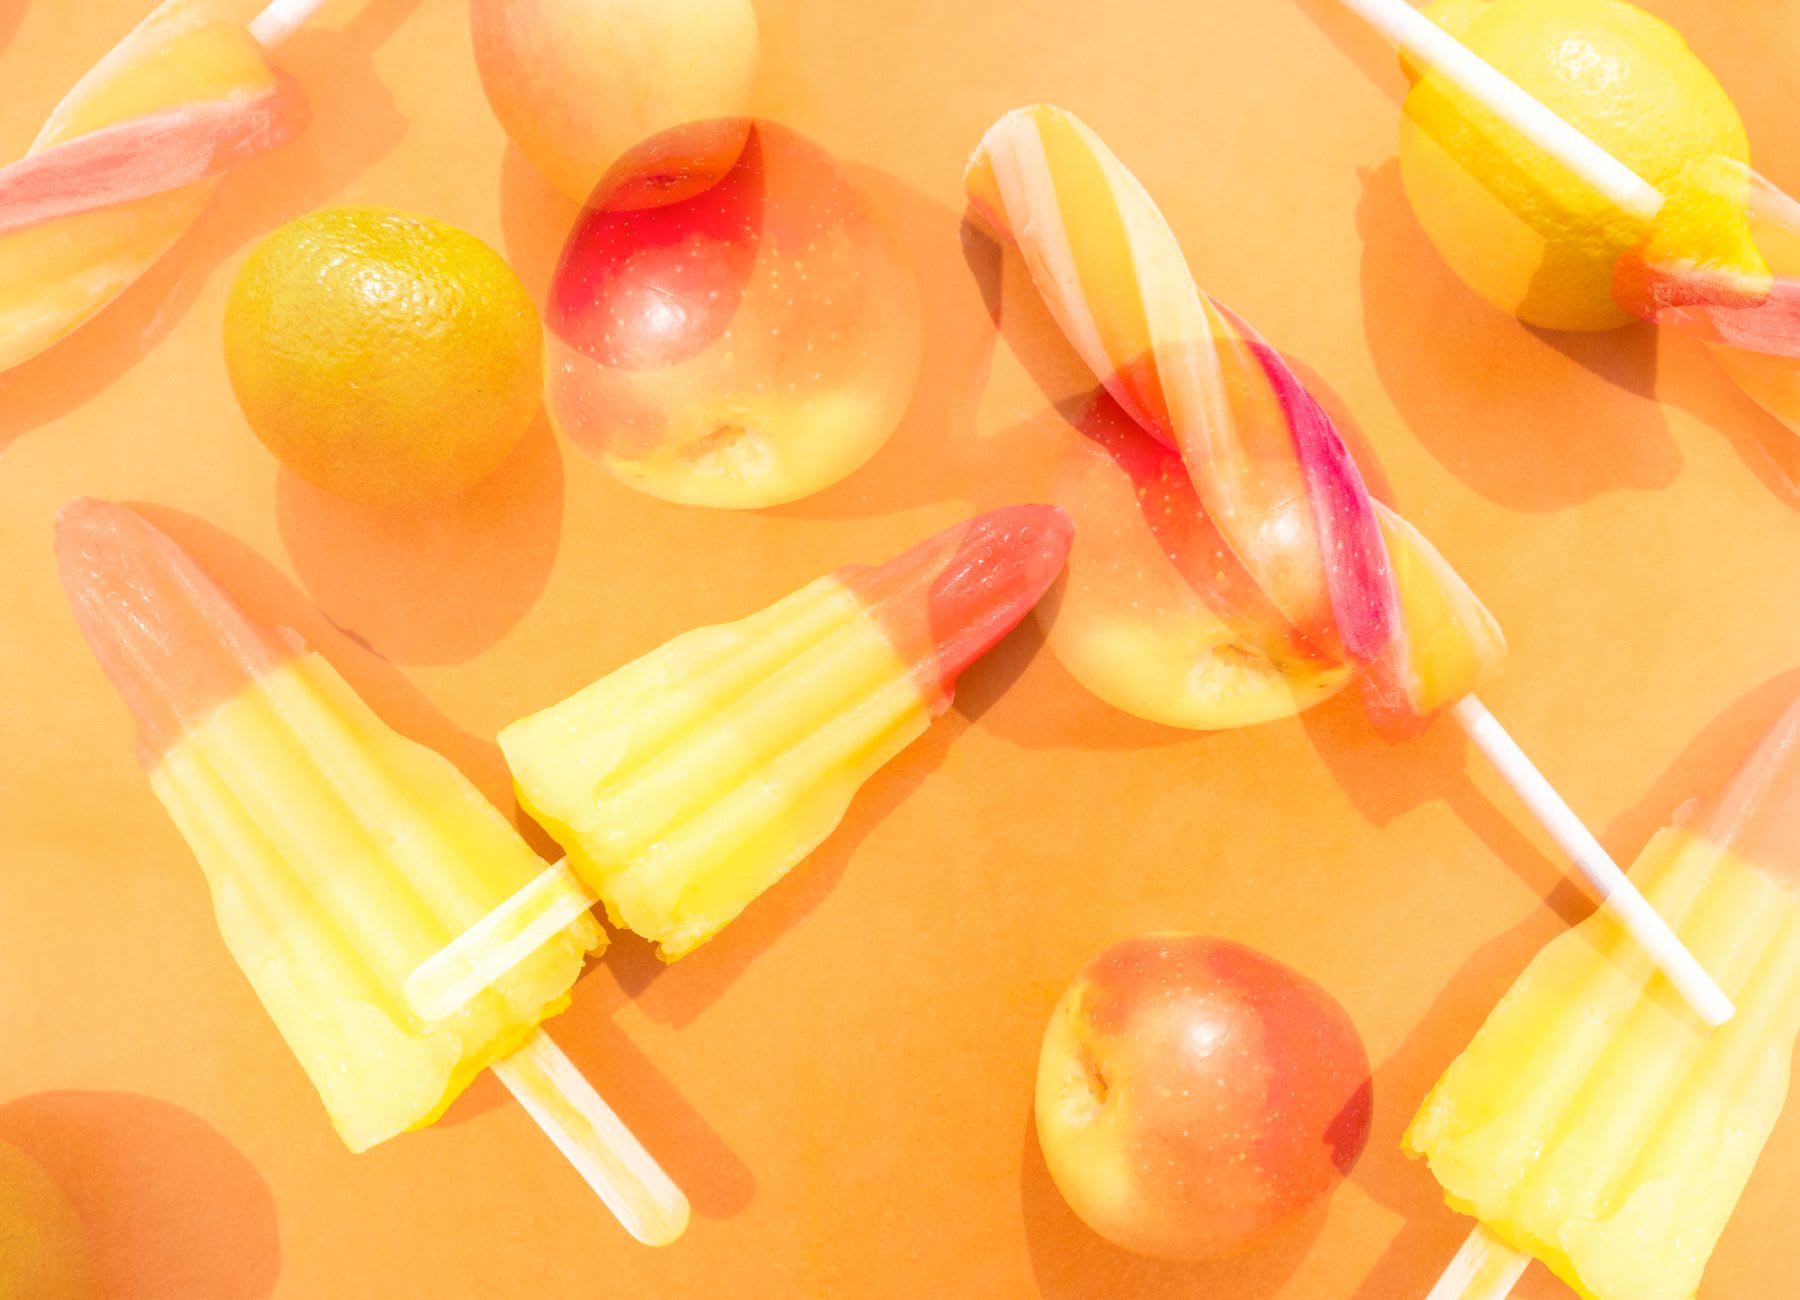 Popsicles and spiral popsicles on an orange background with apples and lemons